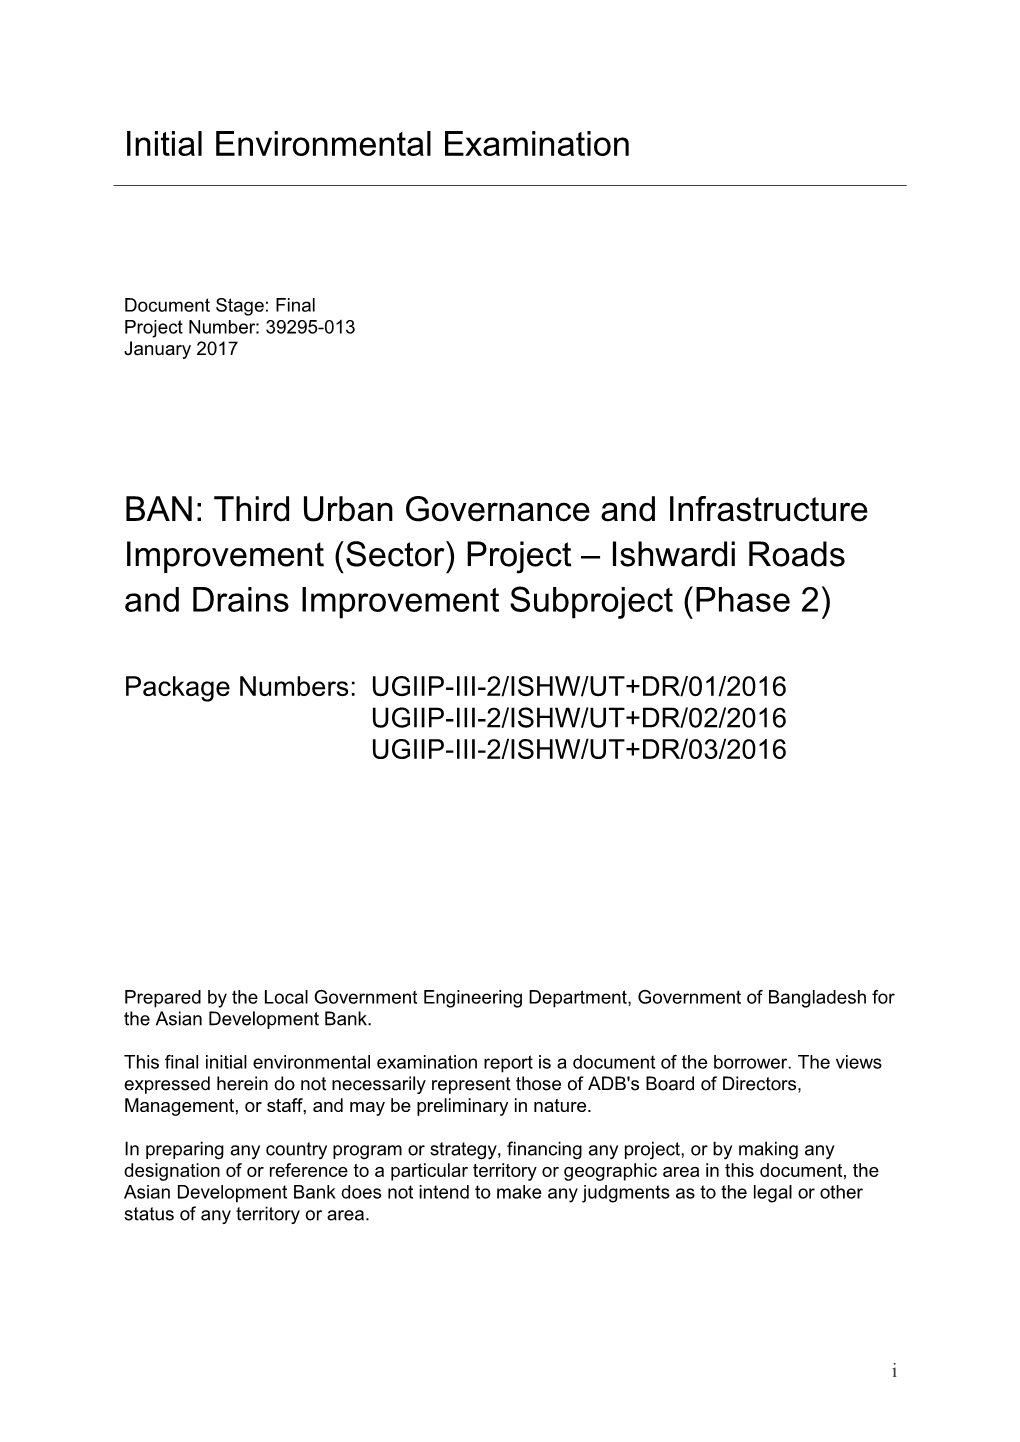 Sector) Project – Ishwardi Roads and Drains Improvement Subproject (Phase 2